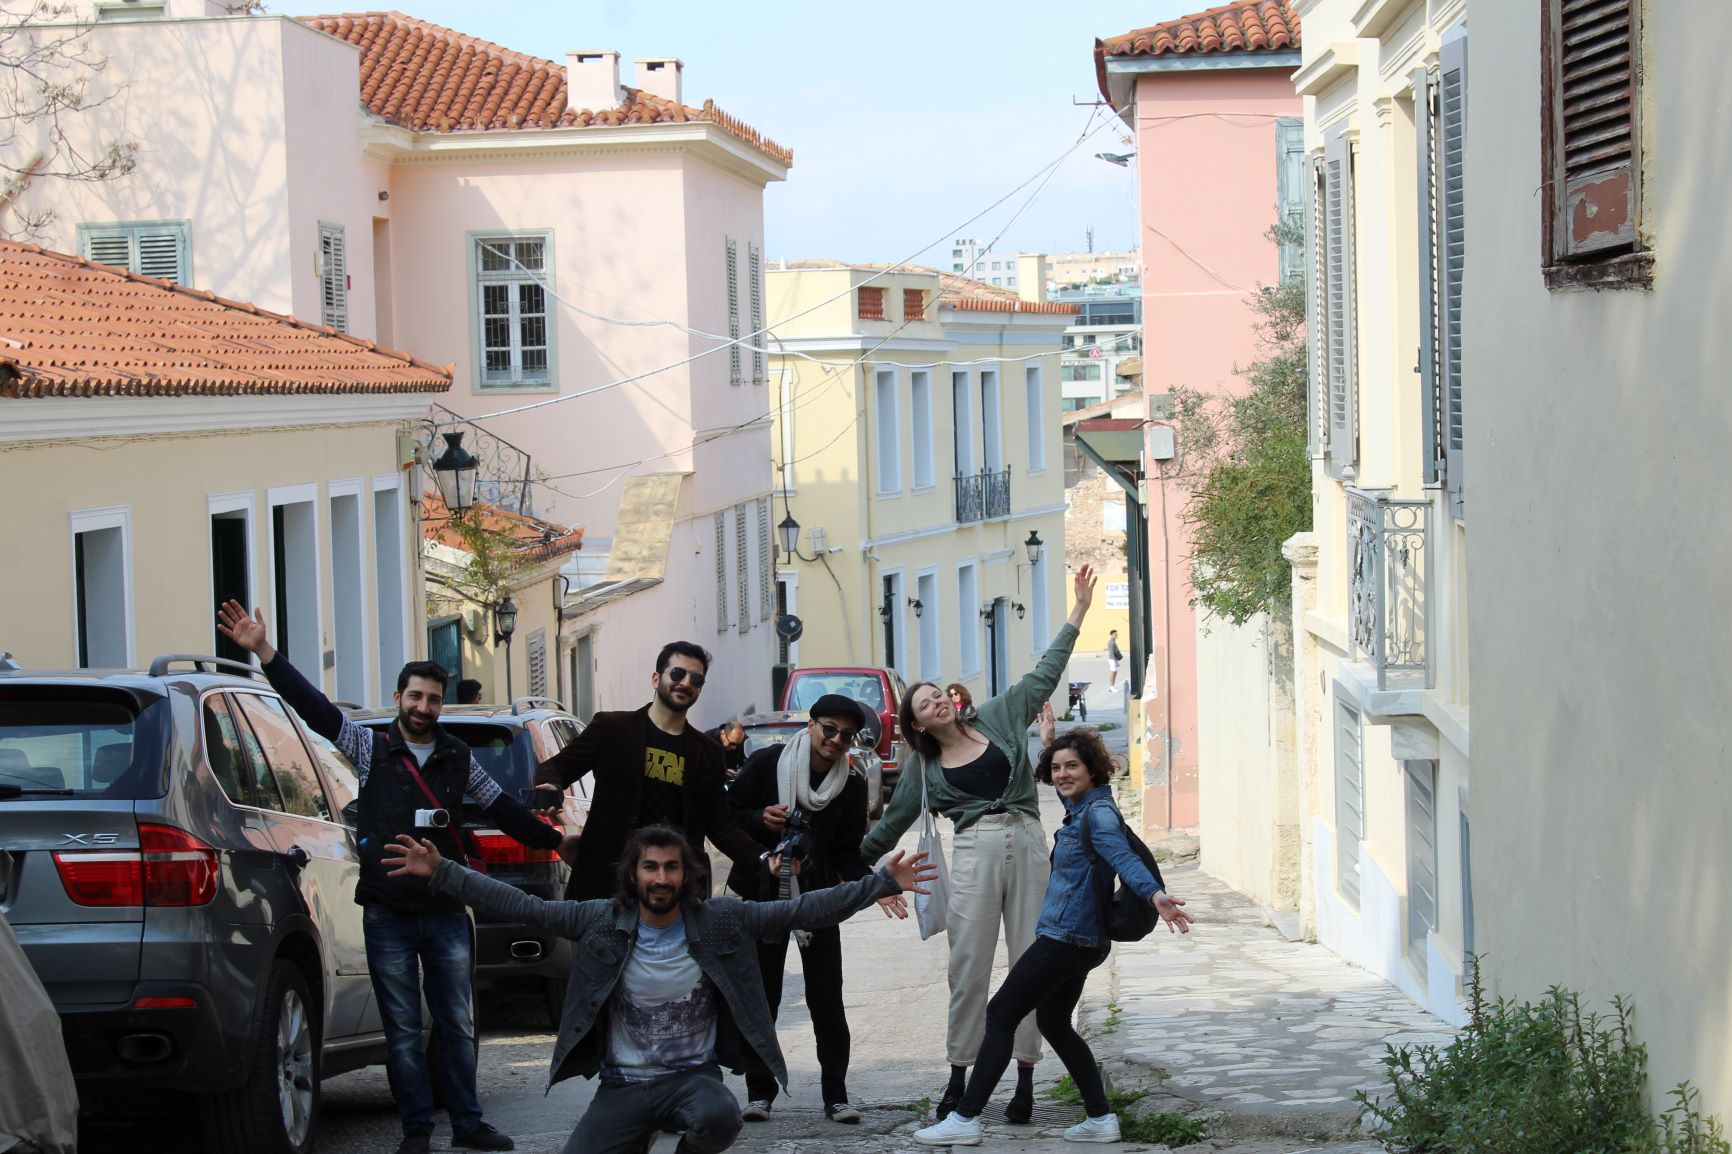 The story of Elisa’s volunteering in Athens with Wind of Renewal